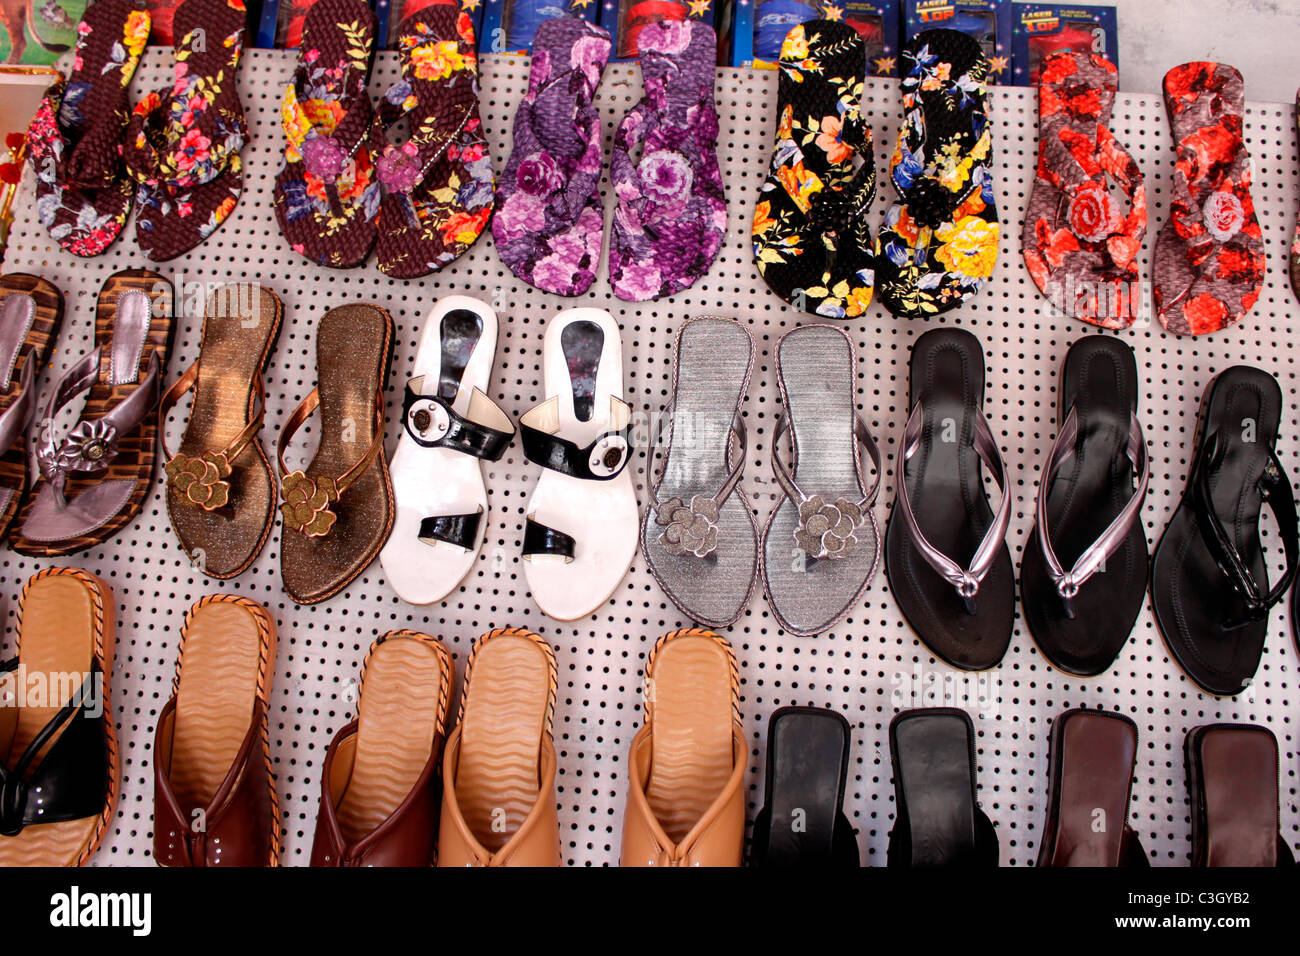 Slippers on display in an indian shop Stock Photo - Alamy